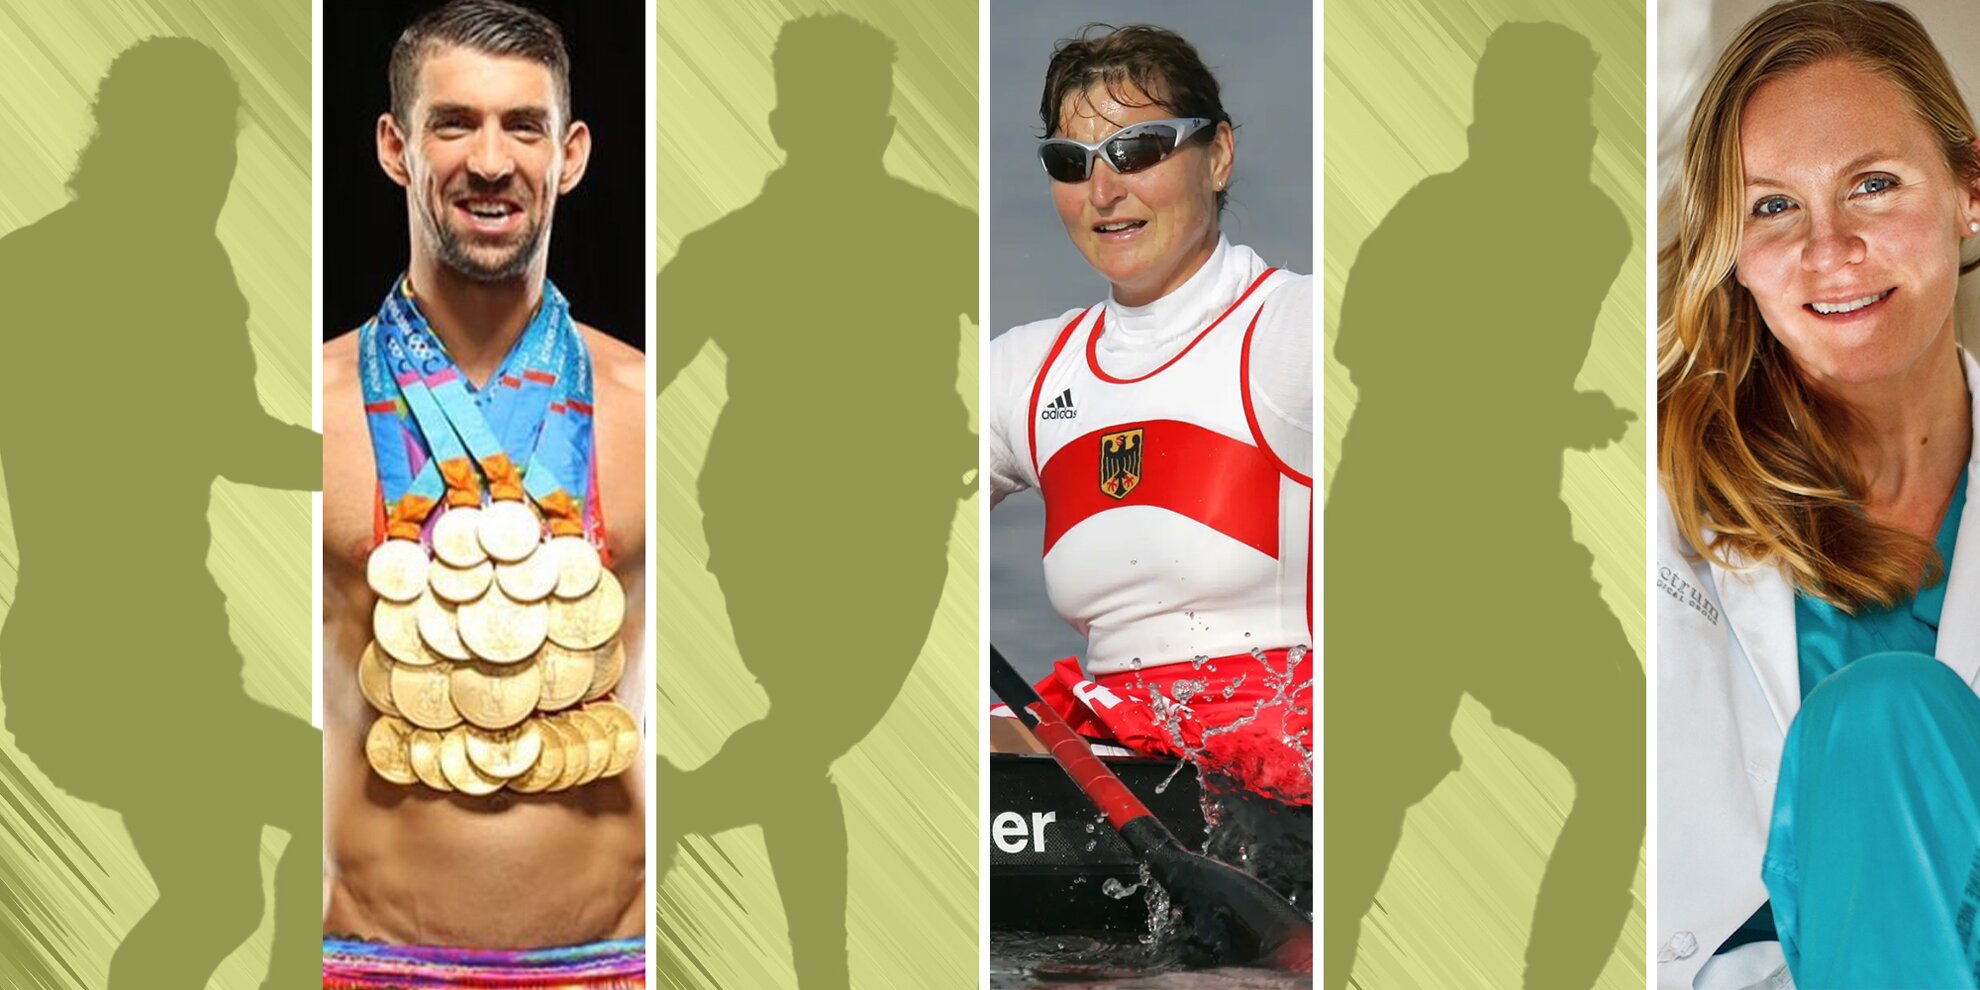 Top Athletes To Have Won The Most Medals At The Olympics